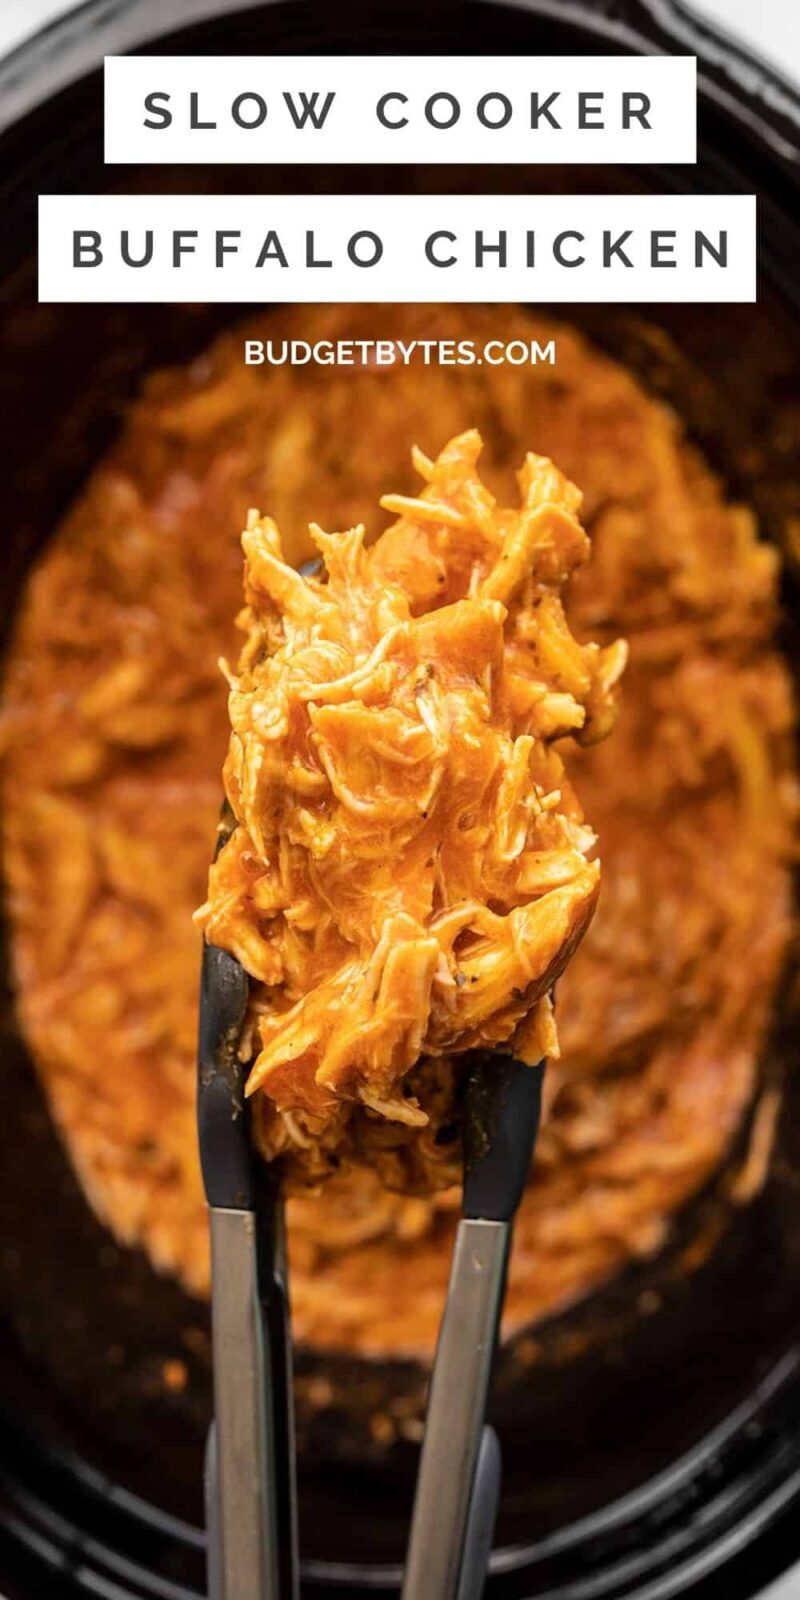 Slow cooker buffalo chicken in tongs over the slow cooker, title text at the top